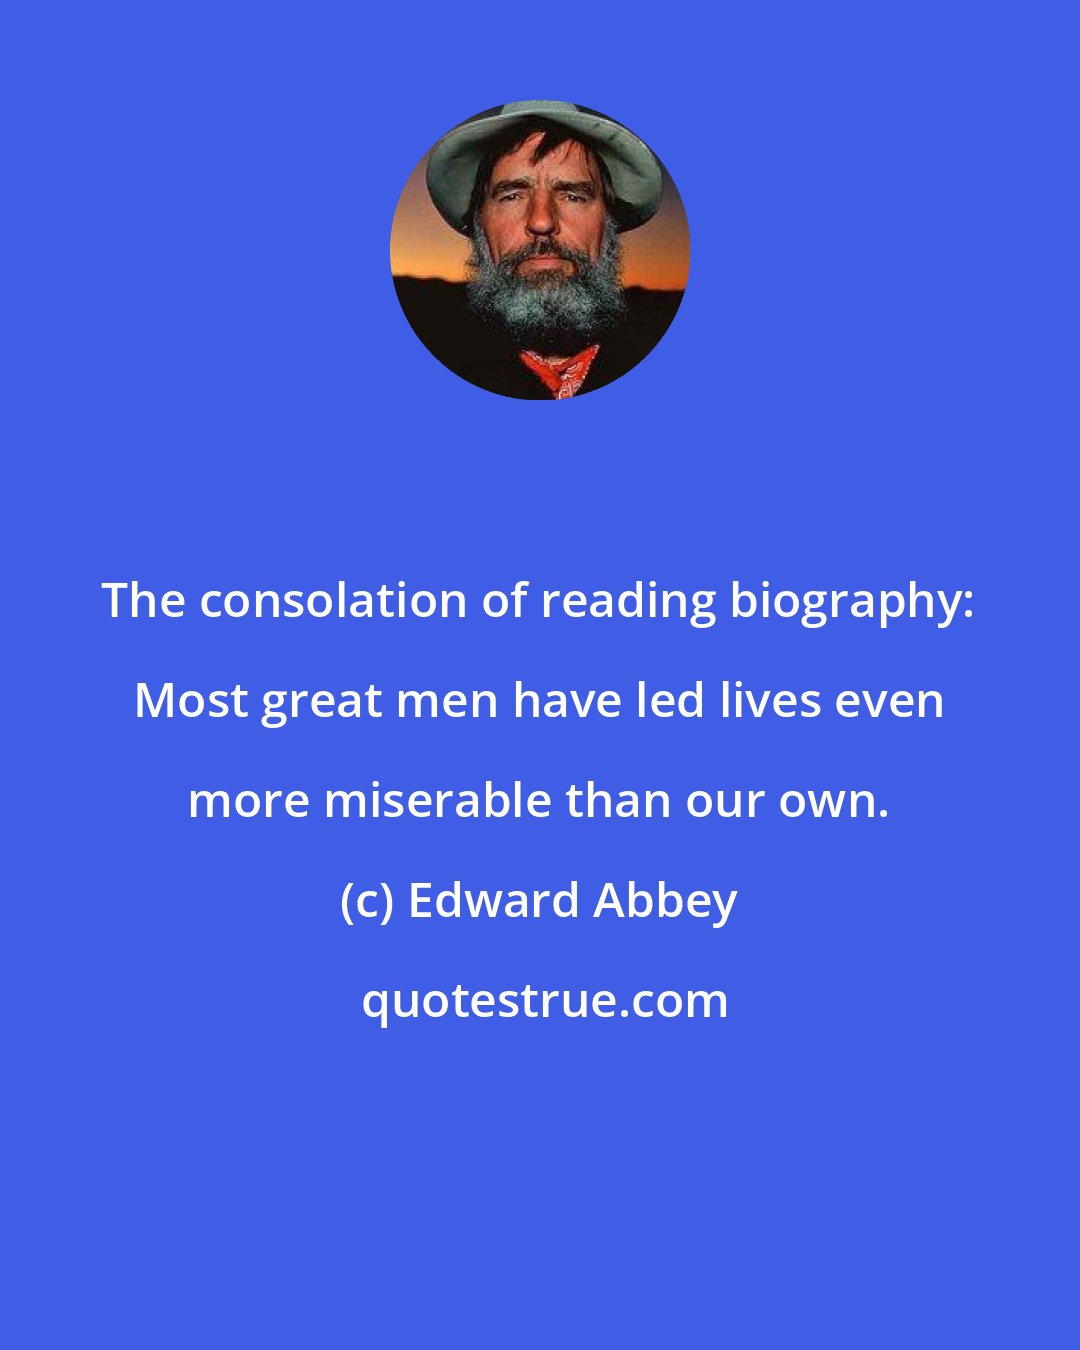 Edward Abbey: The consolation of reading biography: Most great men have led lives even more miserable than our own.